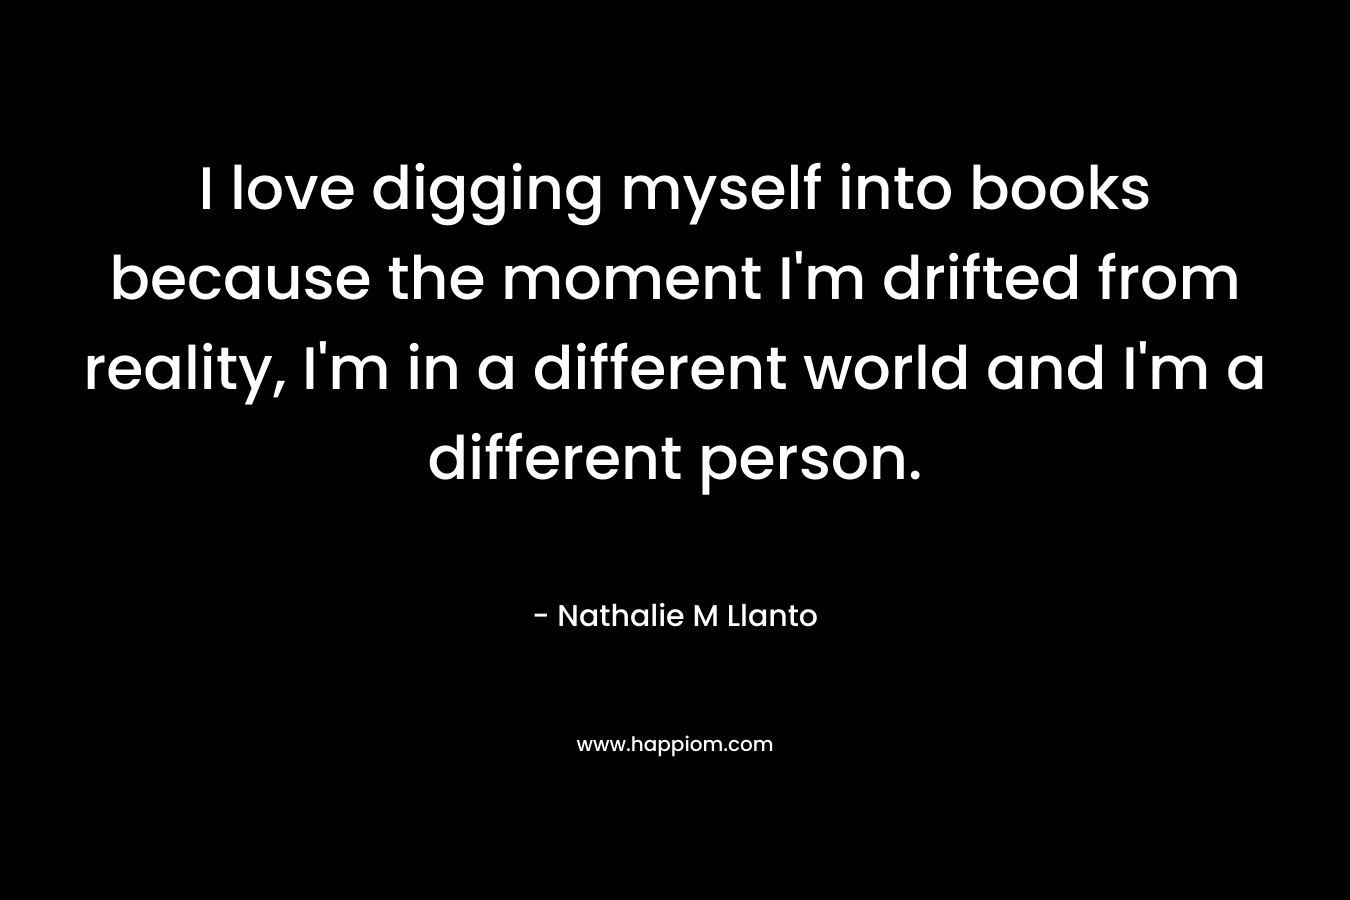 I love digging myself into books because the moment I'm drifted from reality, I'm in a different world and I'm a different person.